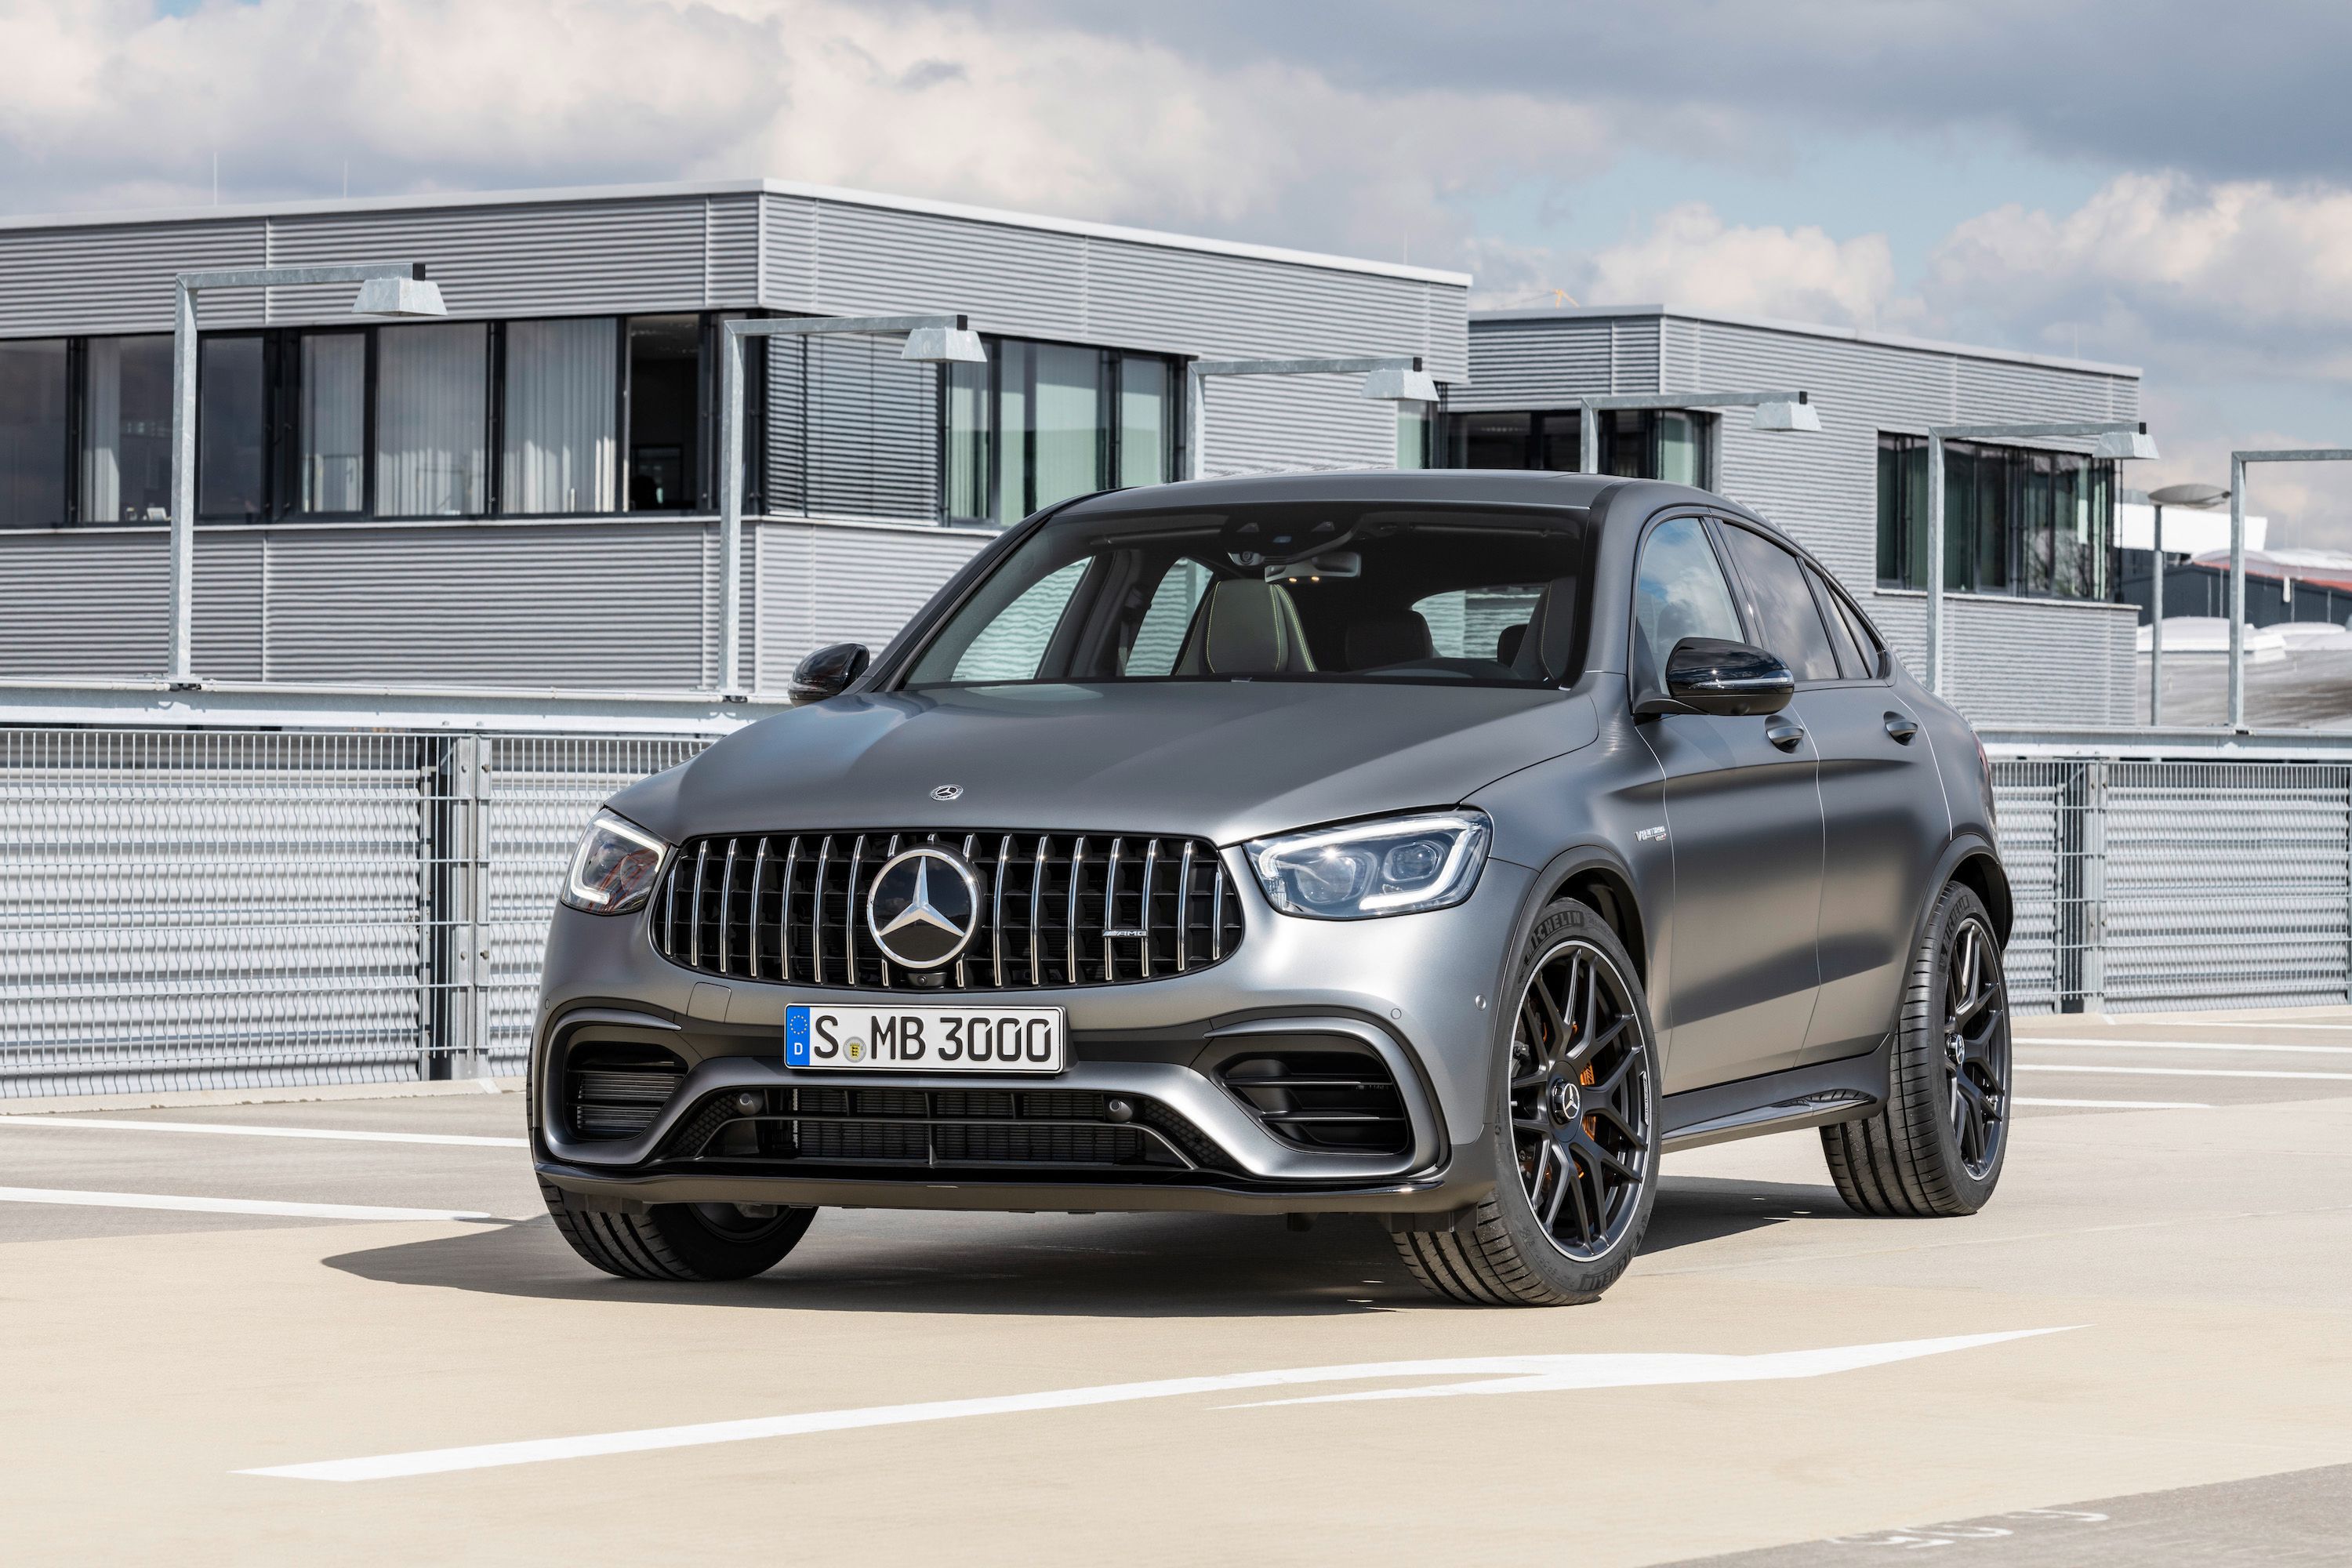 2019 2020 Mercedes-AMG GLC 63 Revealed with Tons of Go-Faster Tech